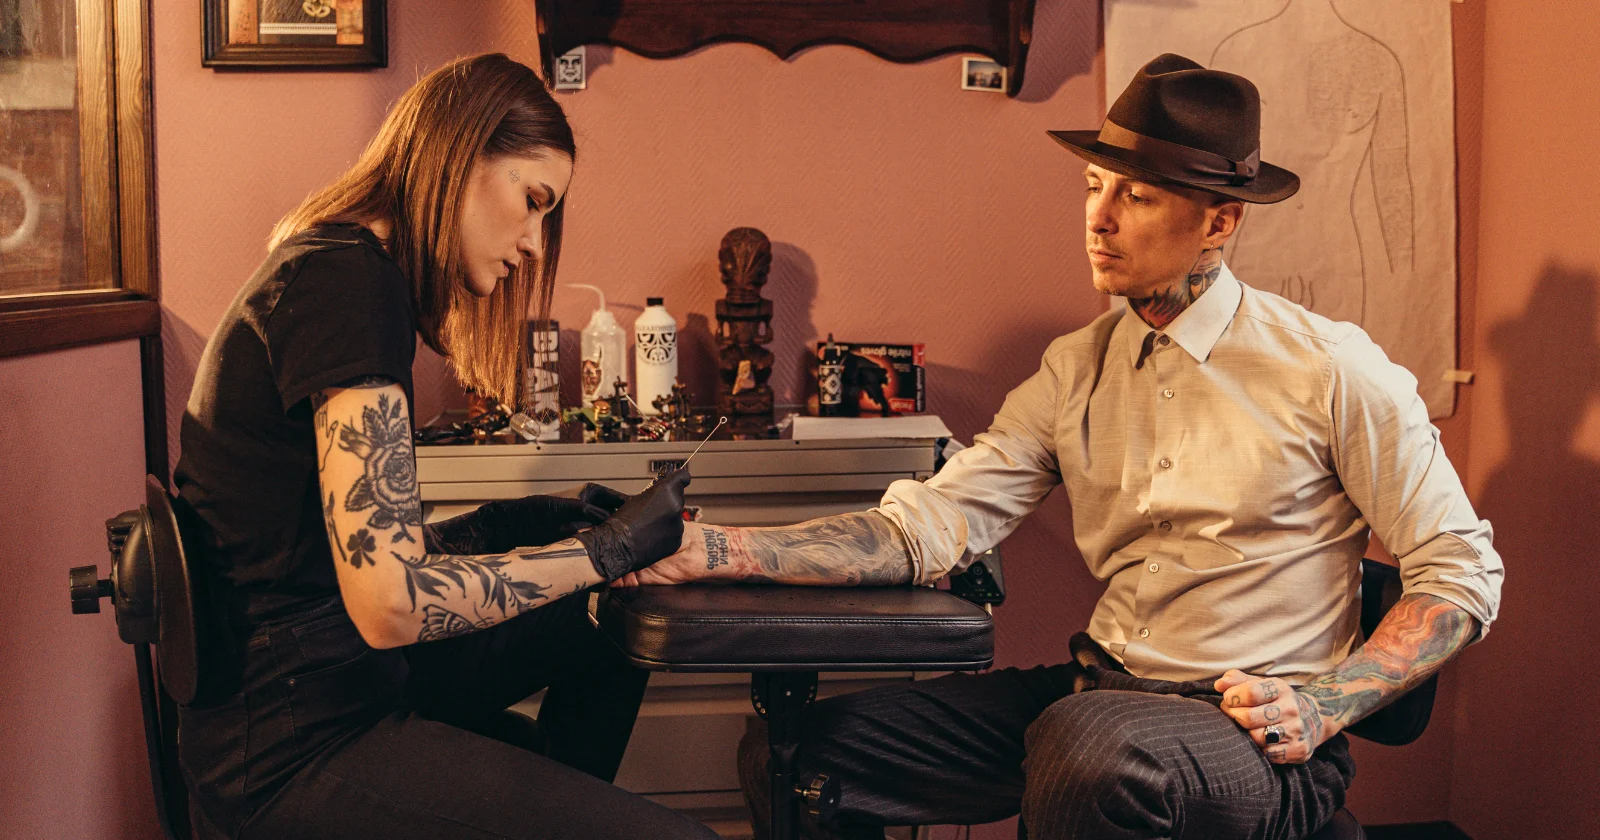 A Step-by-Step Guide on How to Become a Tattoo Artist in Australia